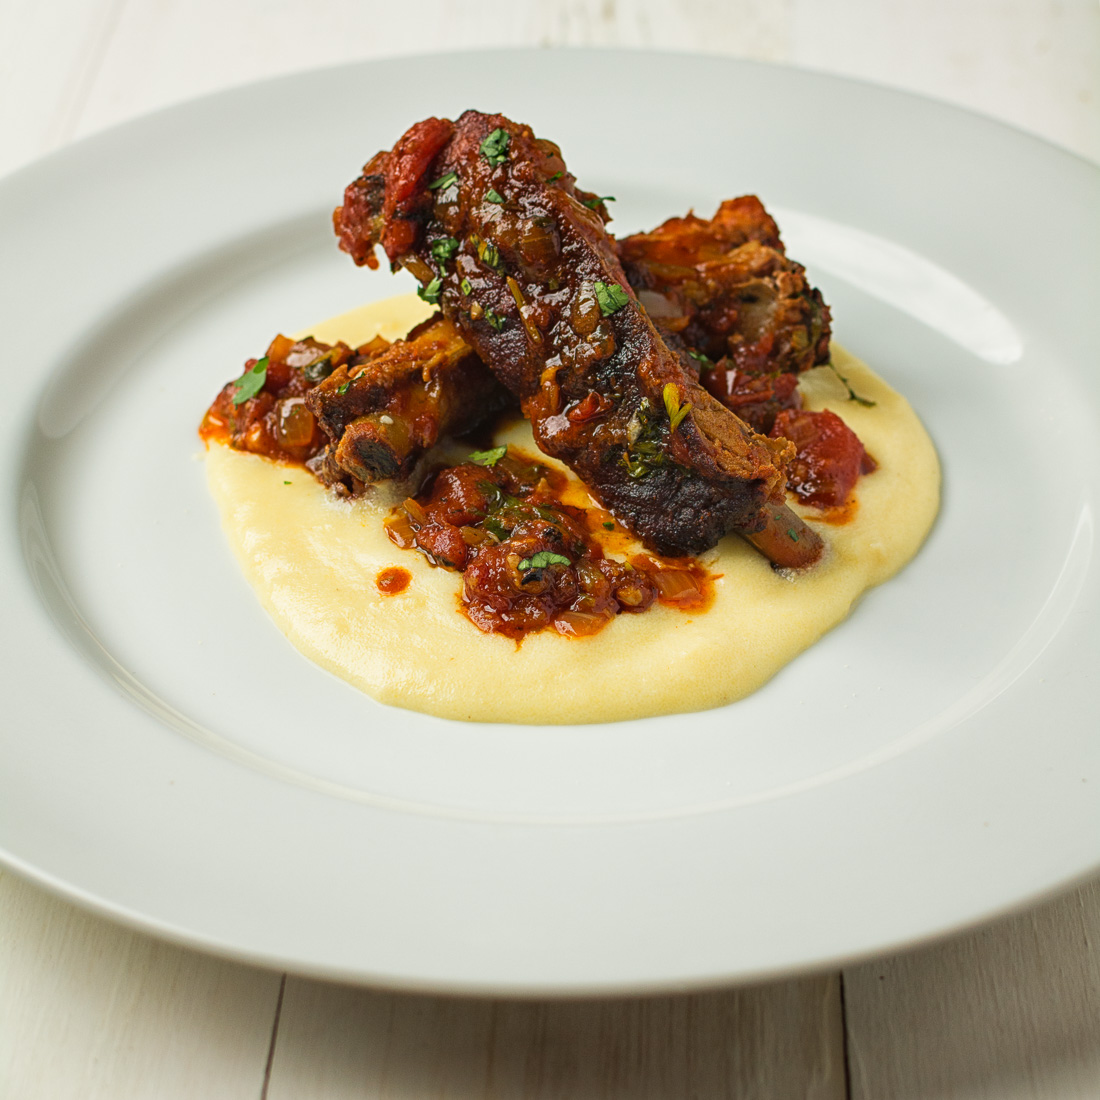 Melting pork back ribs, fire roasted tomatoes and cheese polenta come together in this fine dining riff on Mexican pork chili.